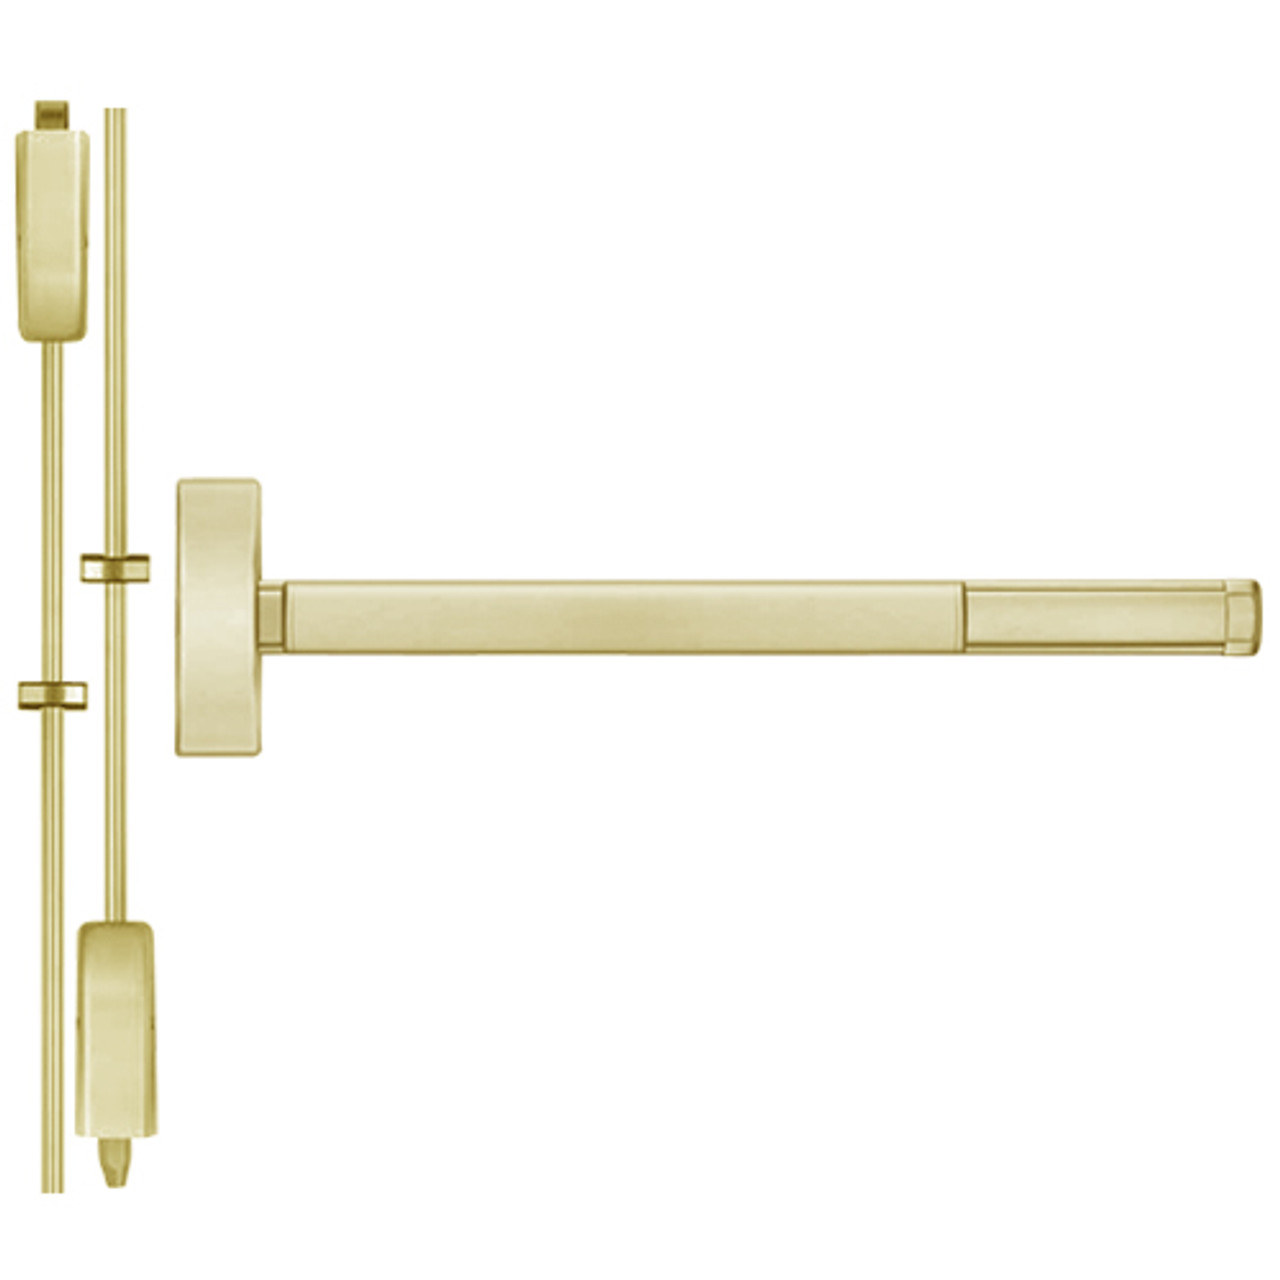 TSFL2202LBR-606-48 PHI 2200 Series Apex Surface Vertical Rod Device with Touchbar Monitoring Switch Prepped for Dummy Trim in Satin Brass Finish